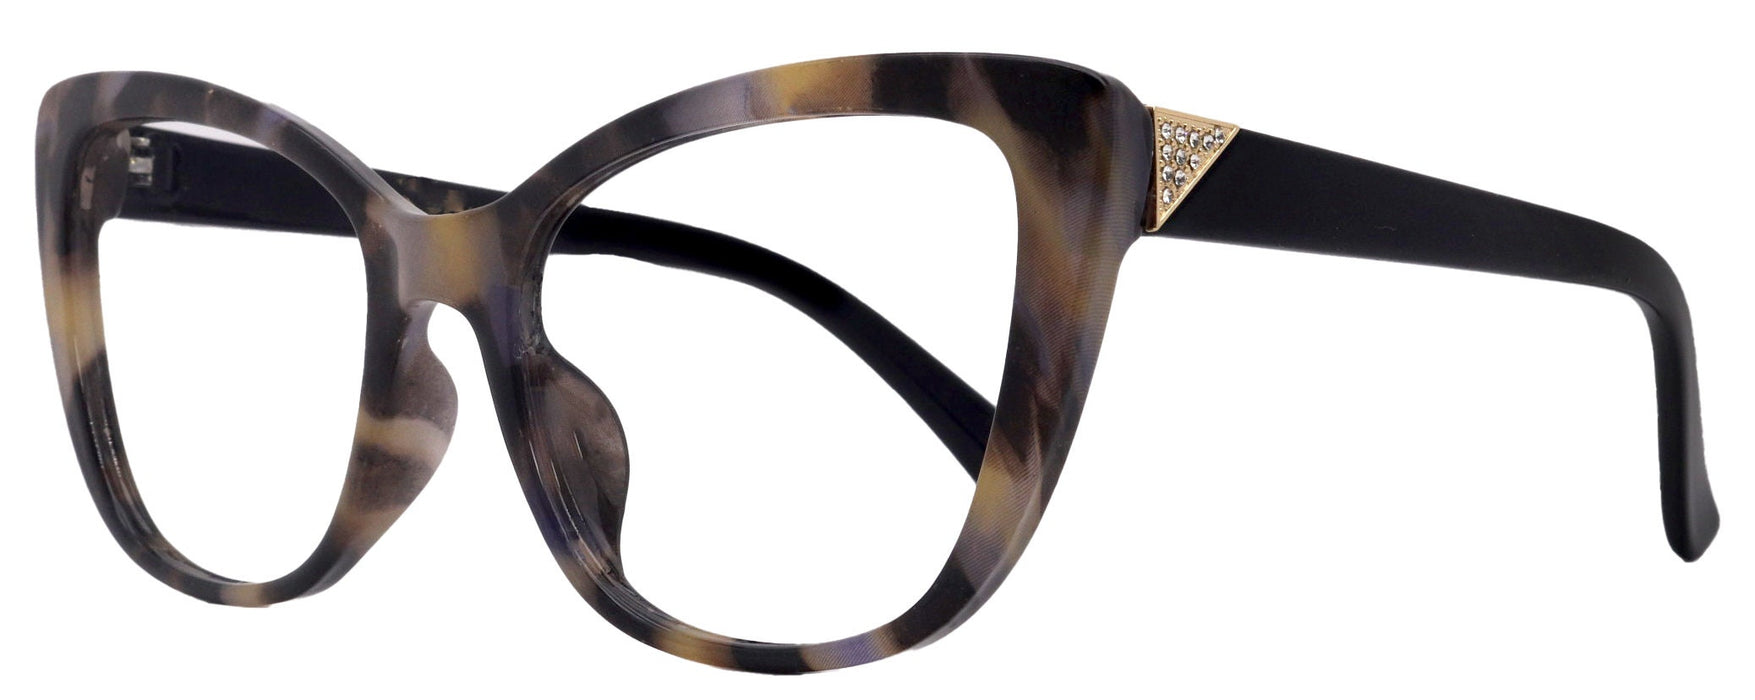 Parisian Fashion High End Bifocal or Non-Bifocal Black W Brown Reading Glasses Cat-Eye Chic, Inspired by NY Fifth Avenue